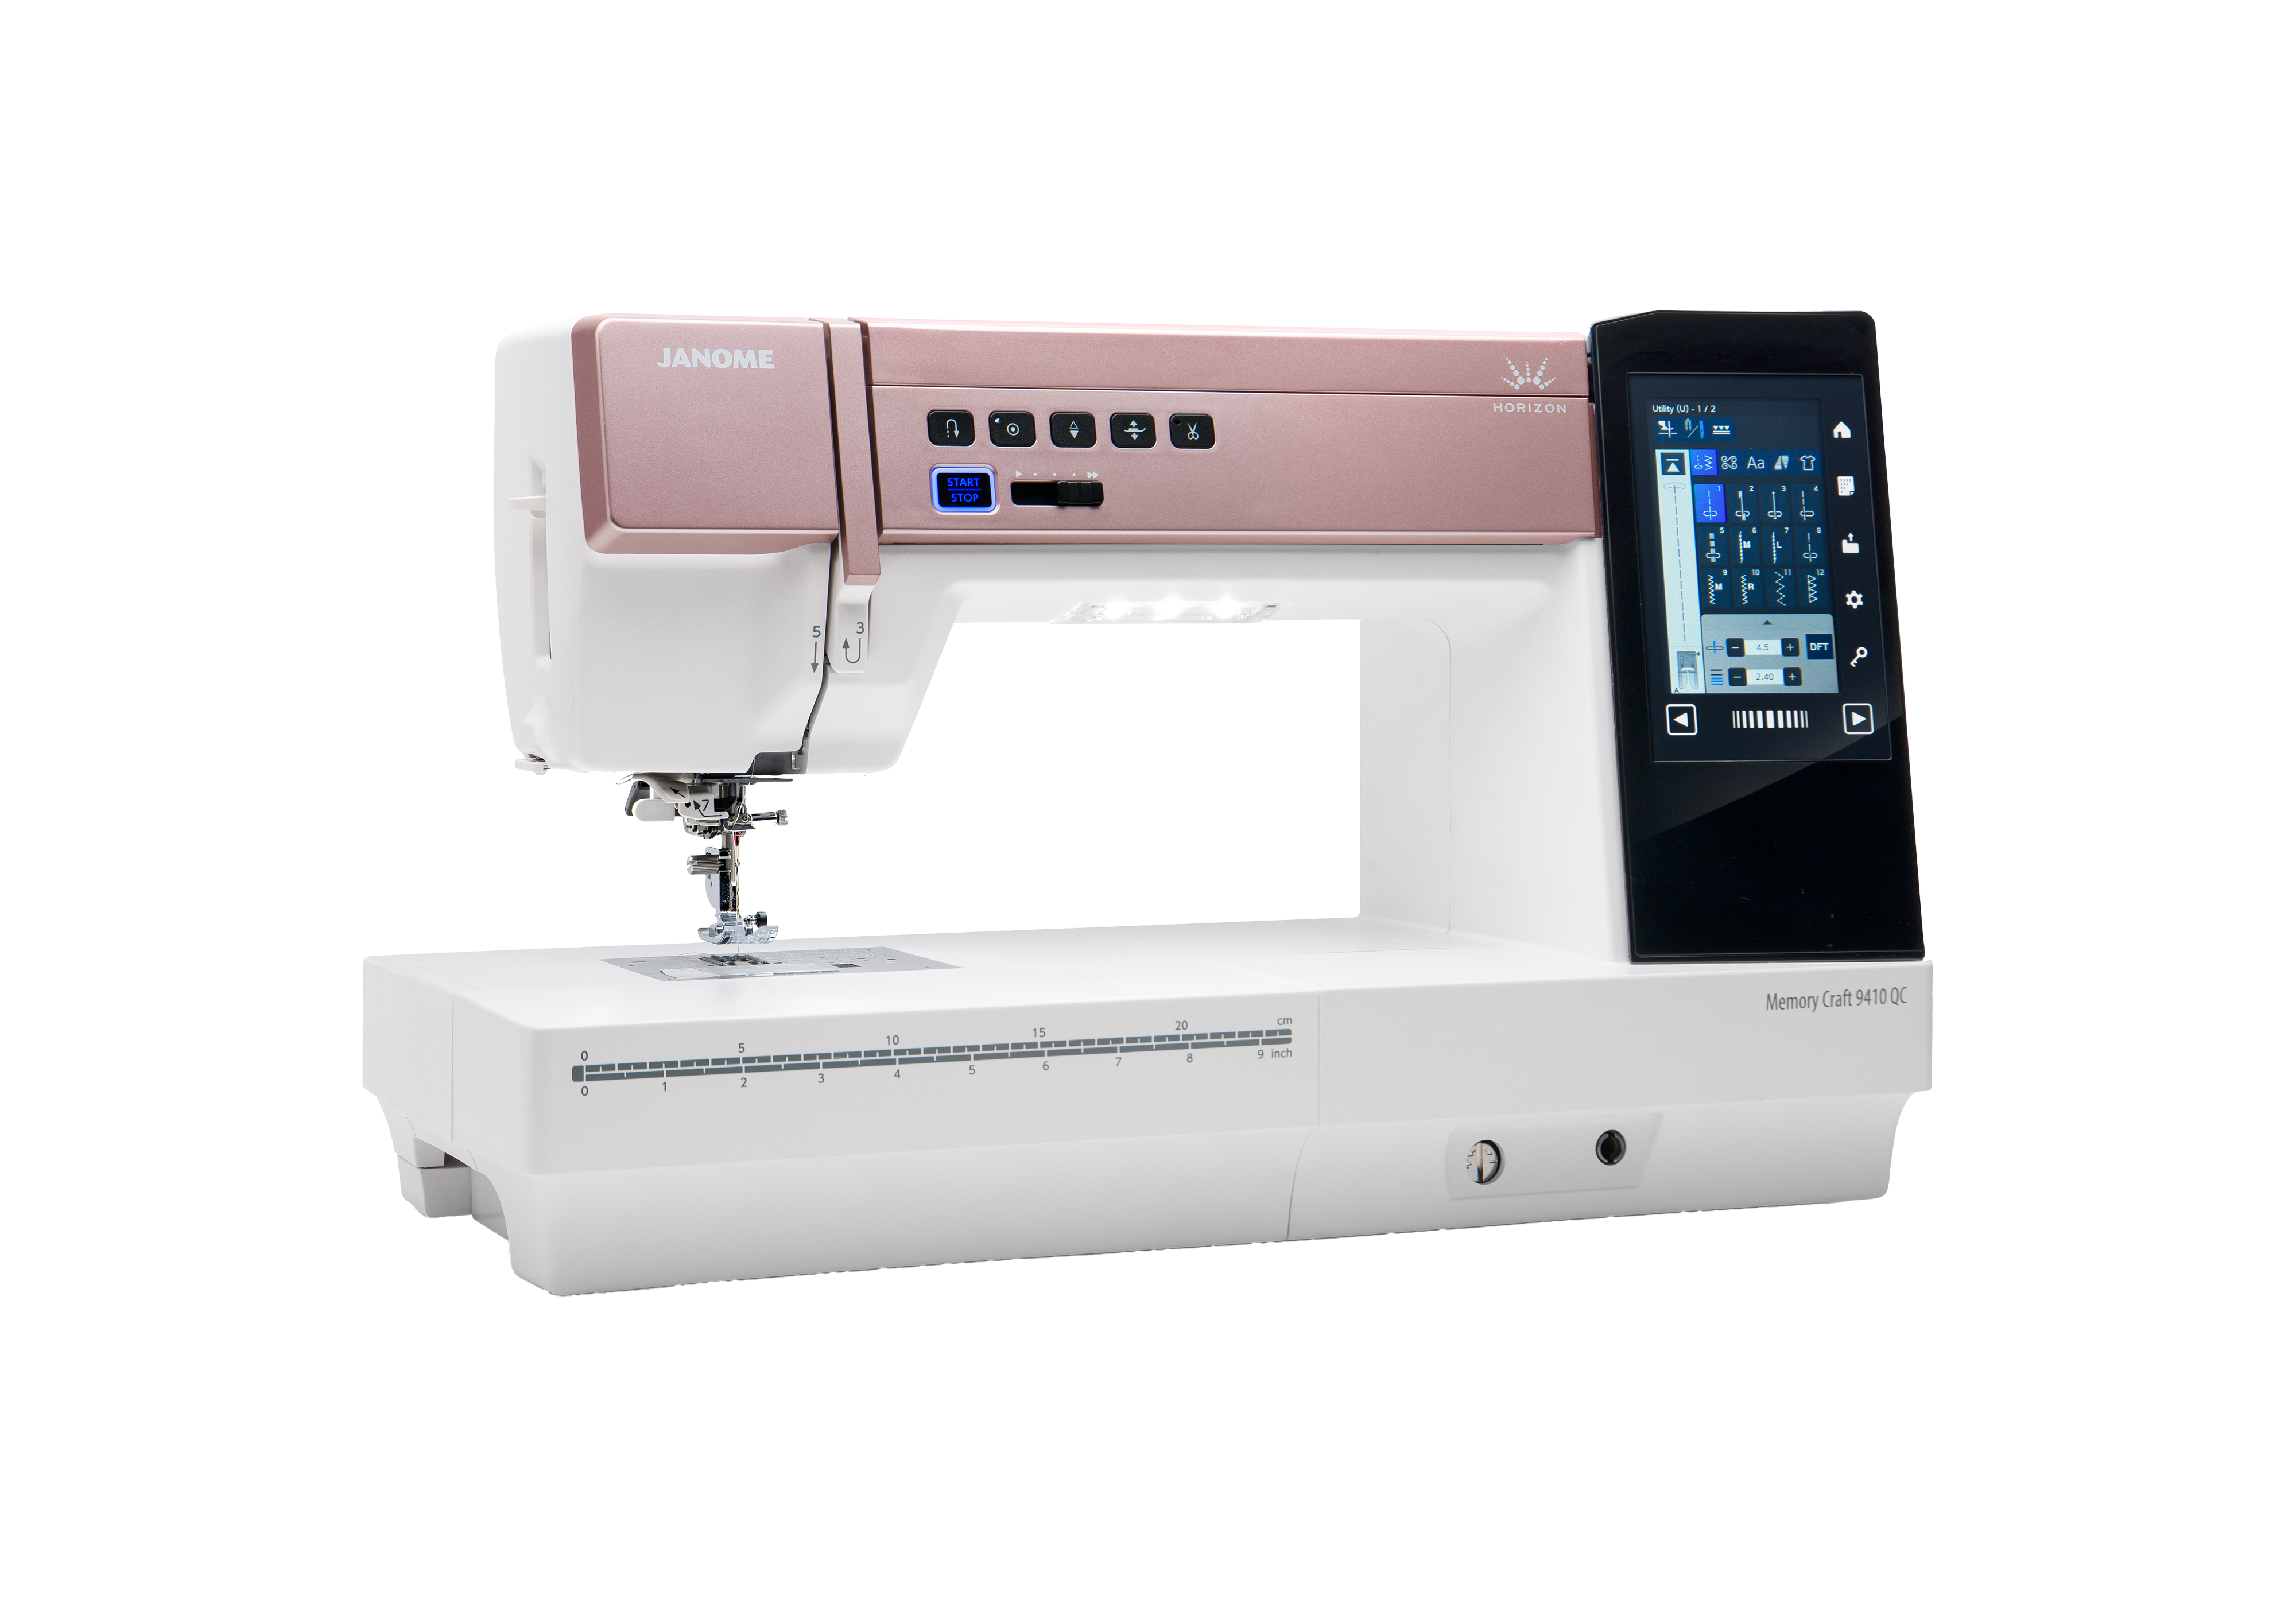 Janome Horizon Memory Craft 9410QC Sewing Machine for Sale at World Weidner